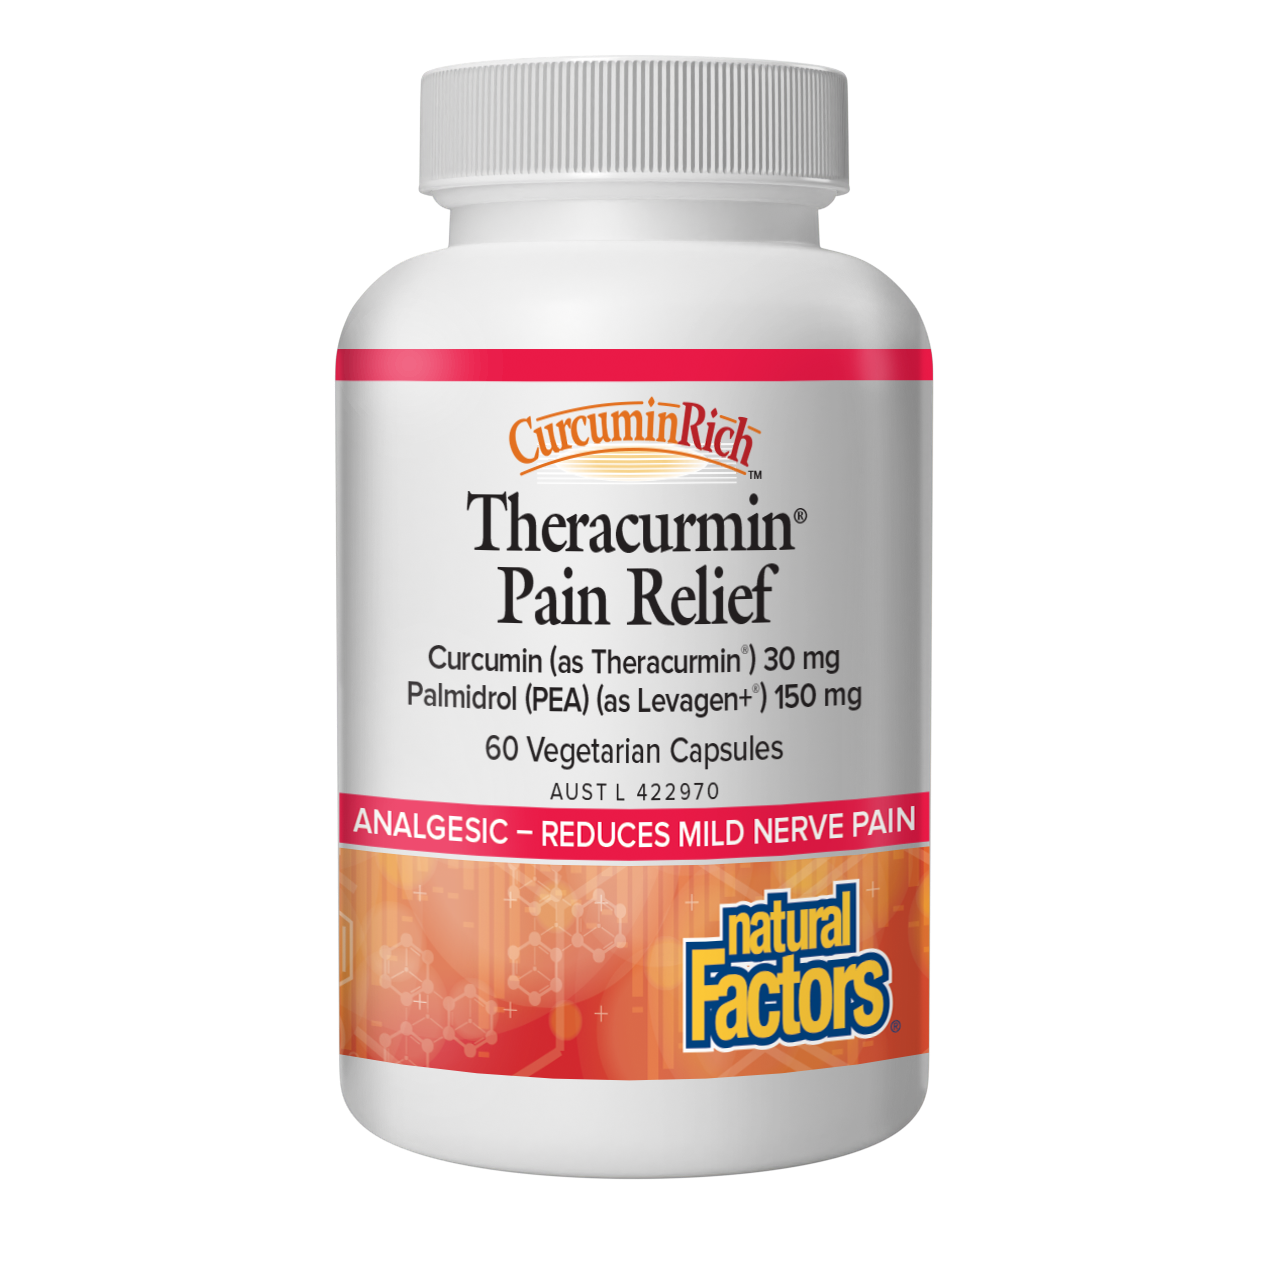 Theracurmin® Pain Relief